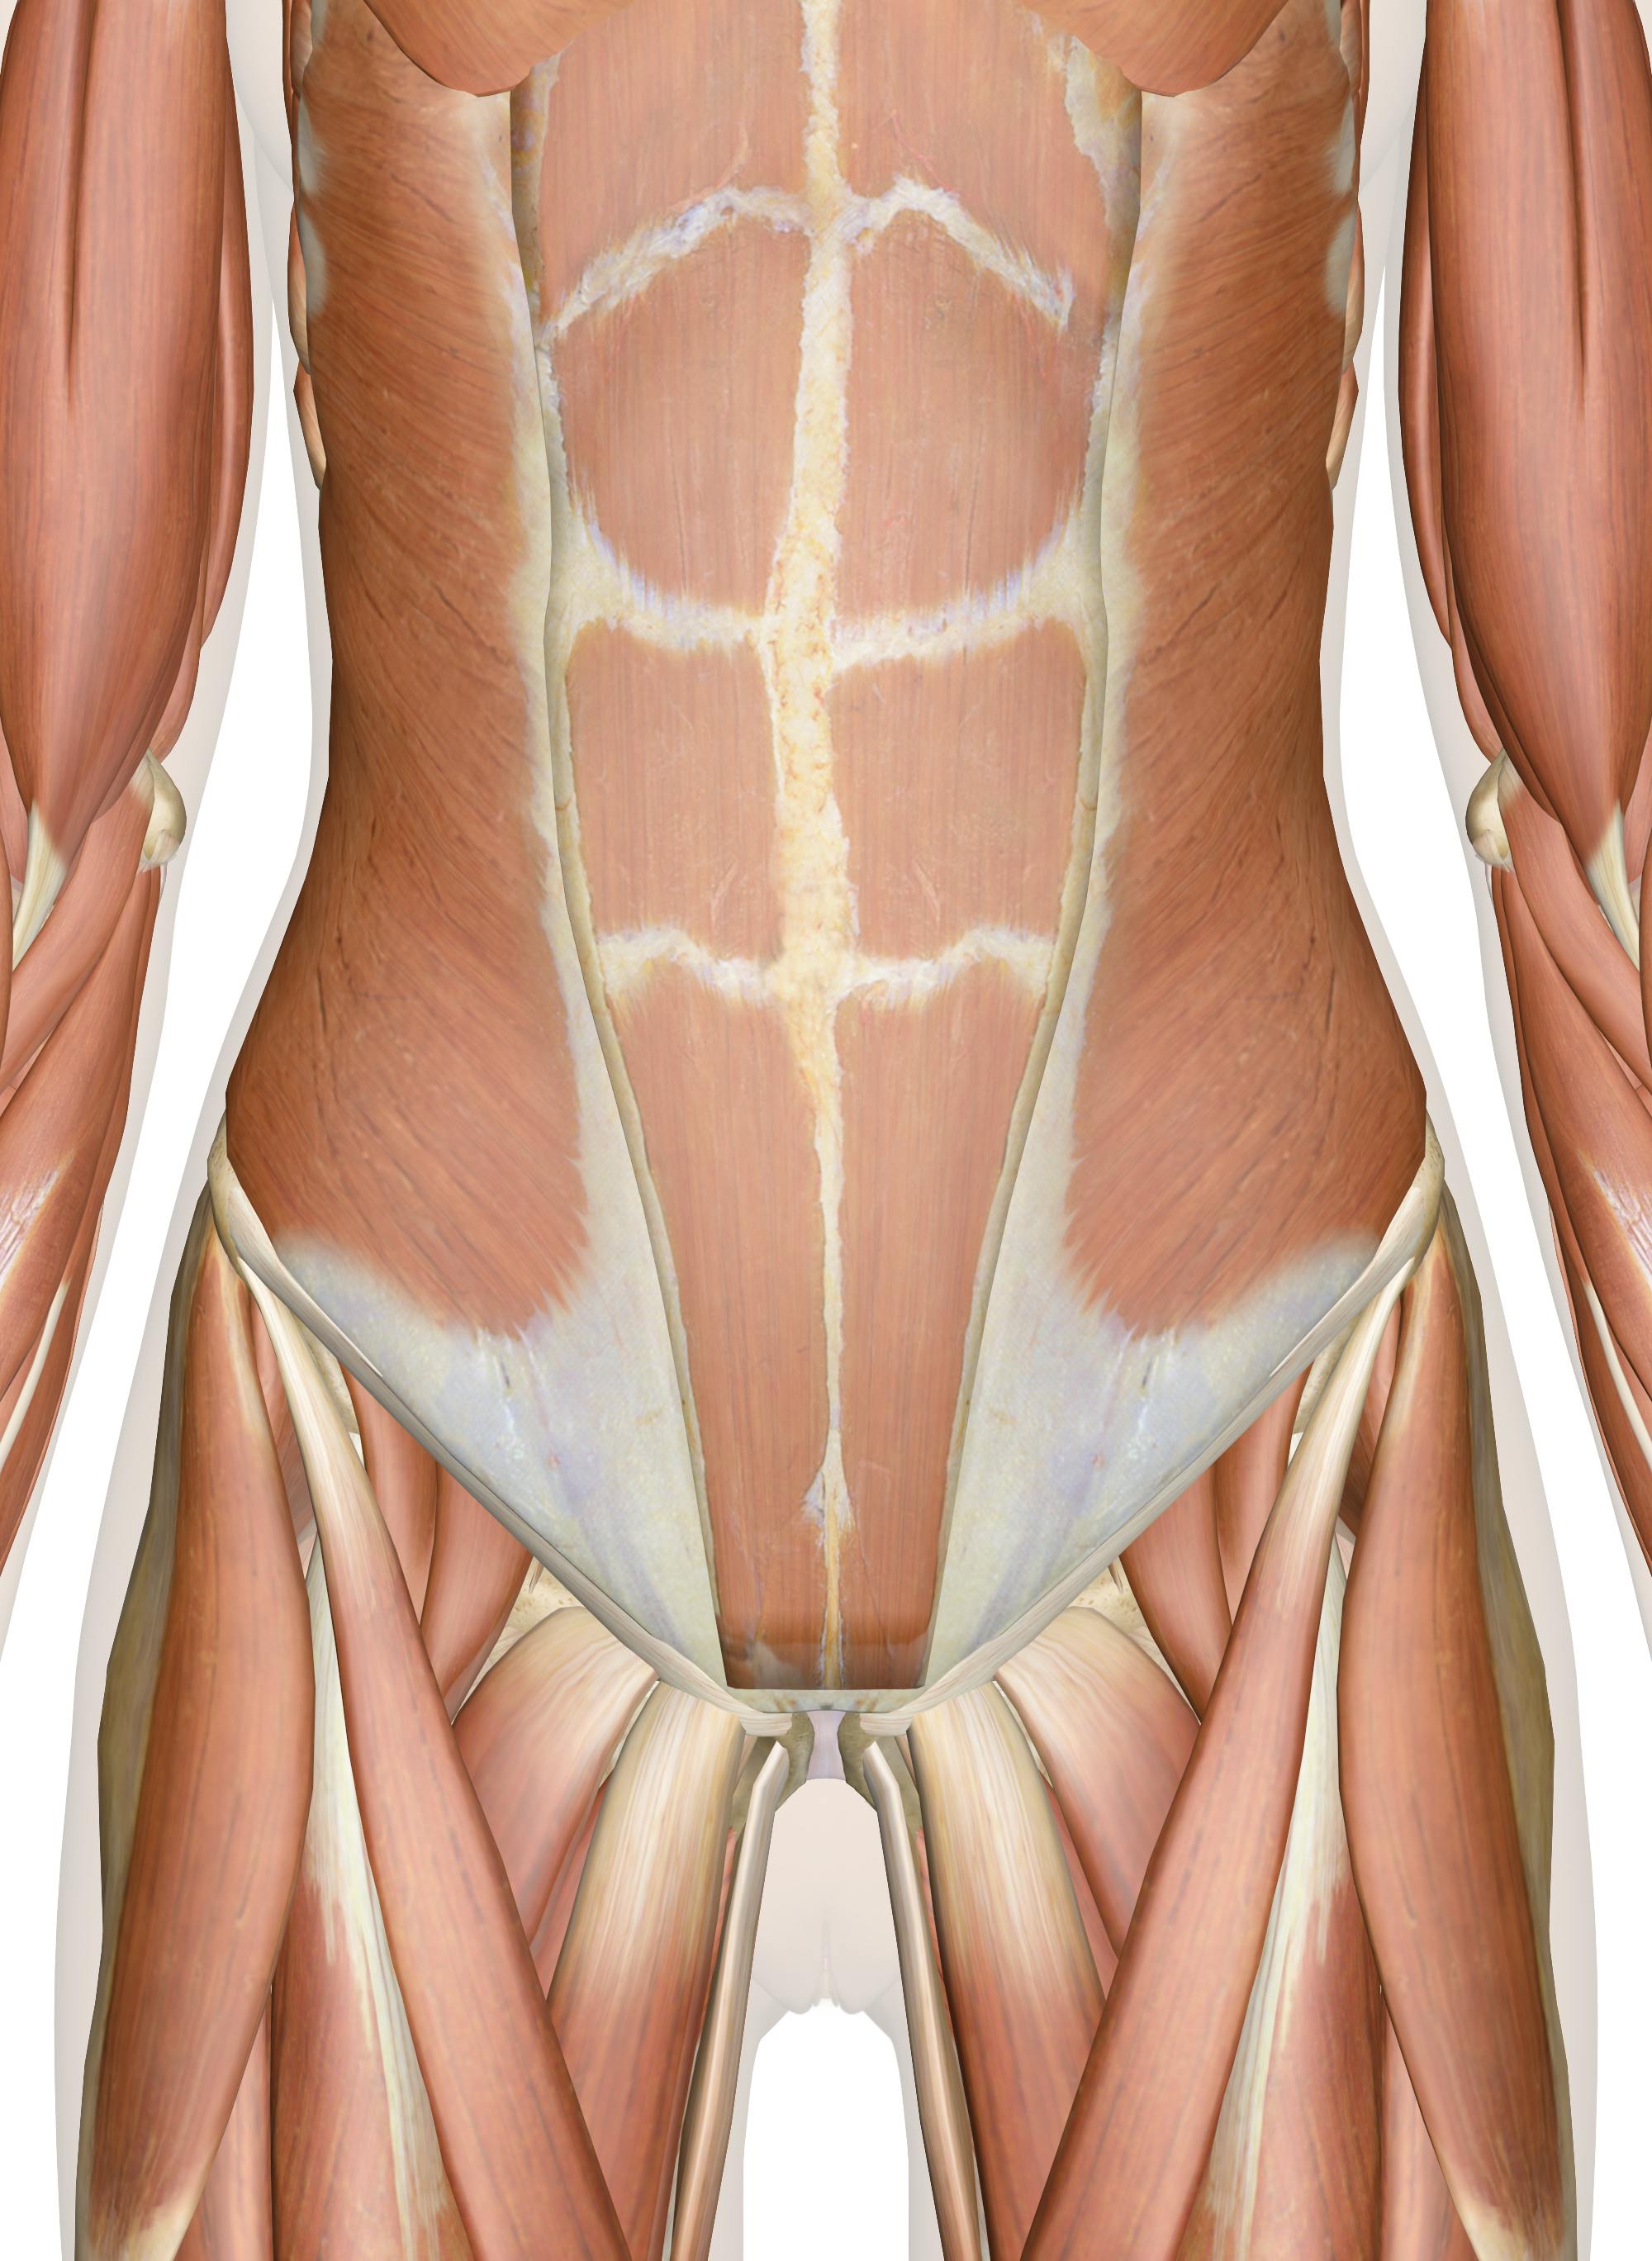 Muscles Of The Abdomen, Lower Back And Pelvis